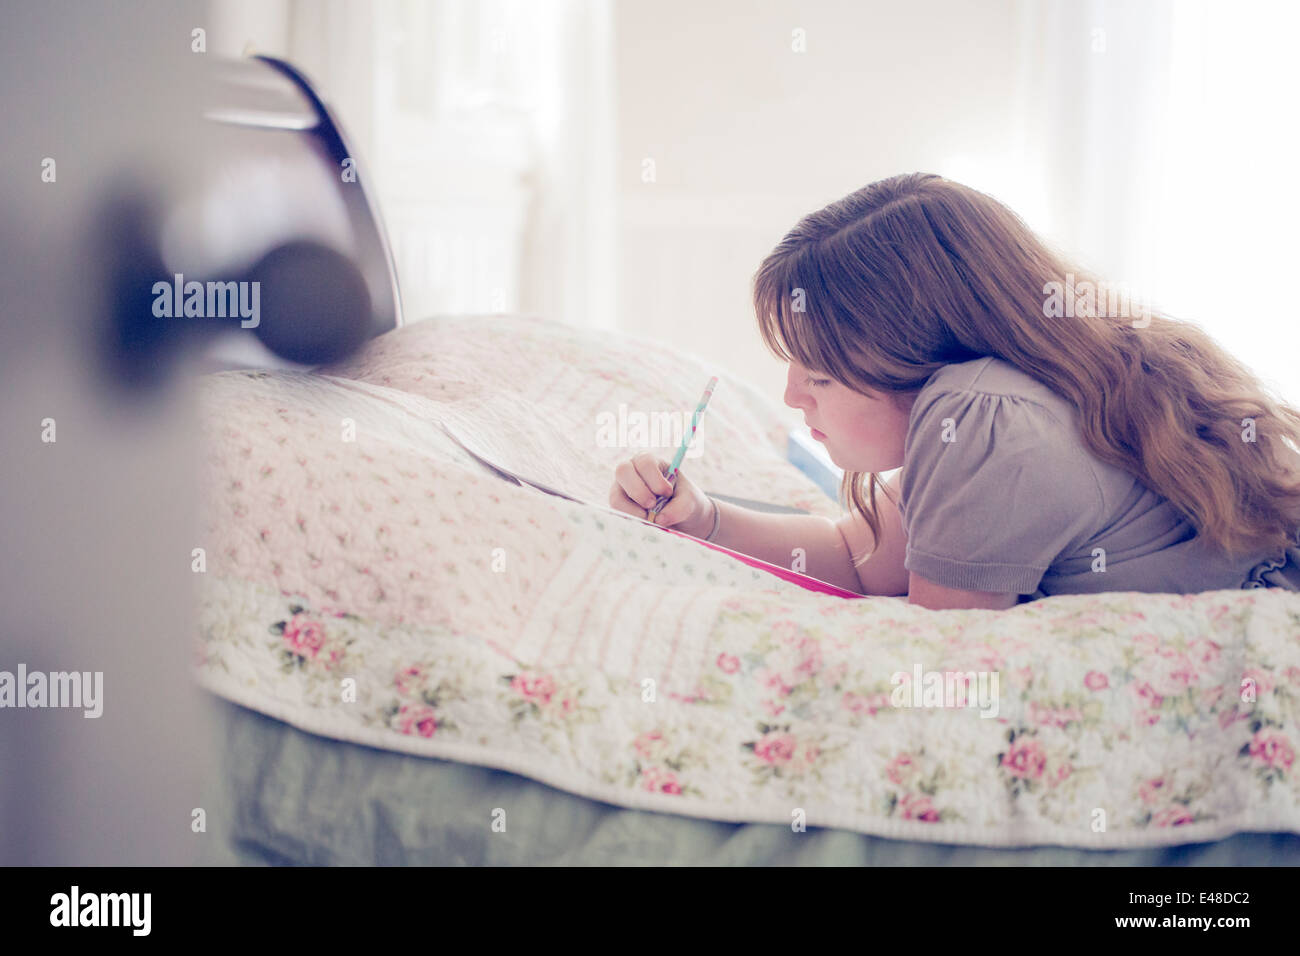 Teenage girl (13-15) lying in bed and writing Stock Photo